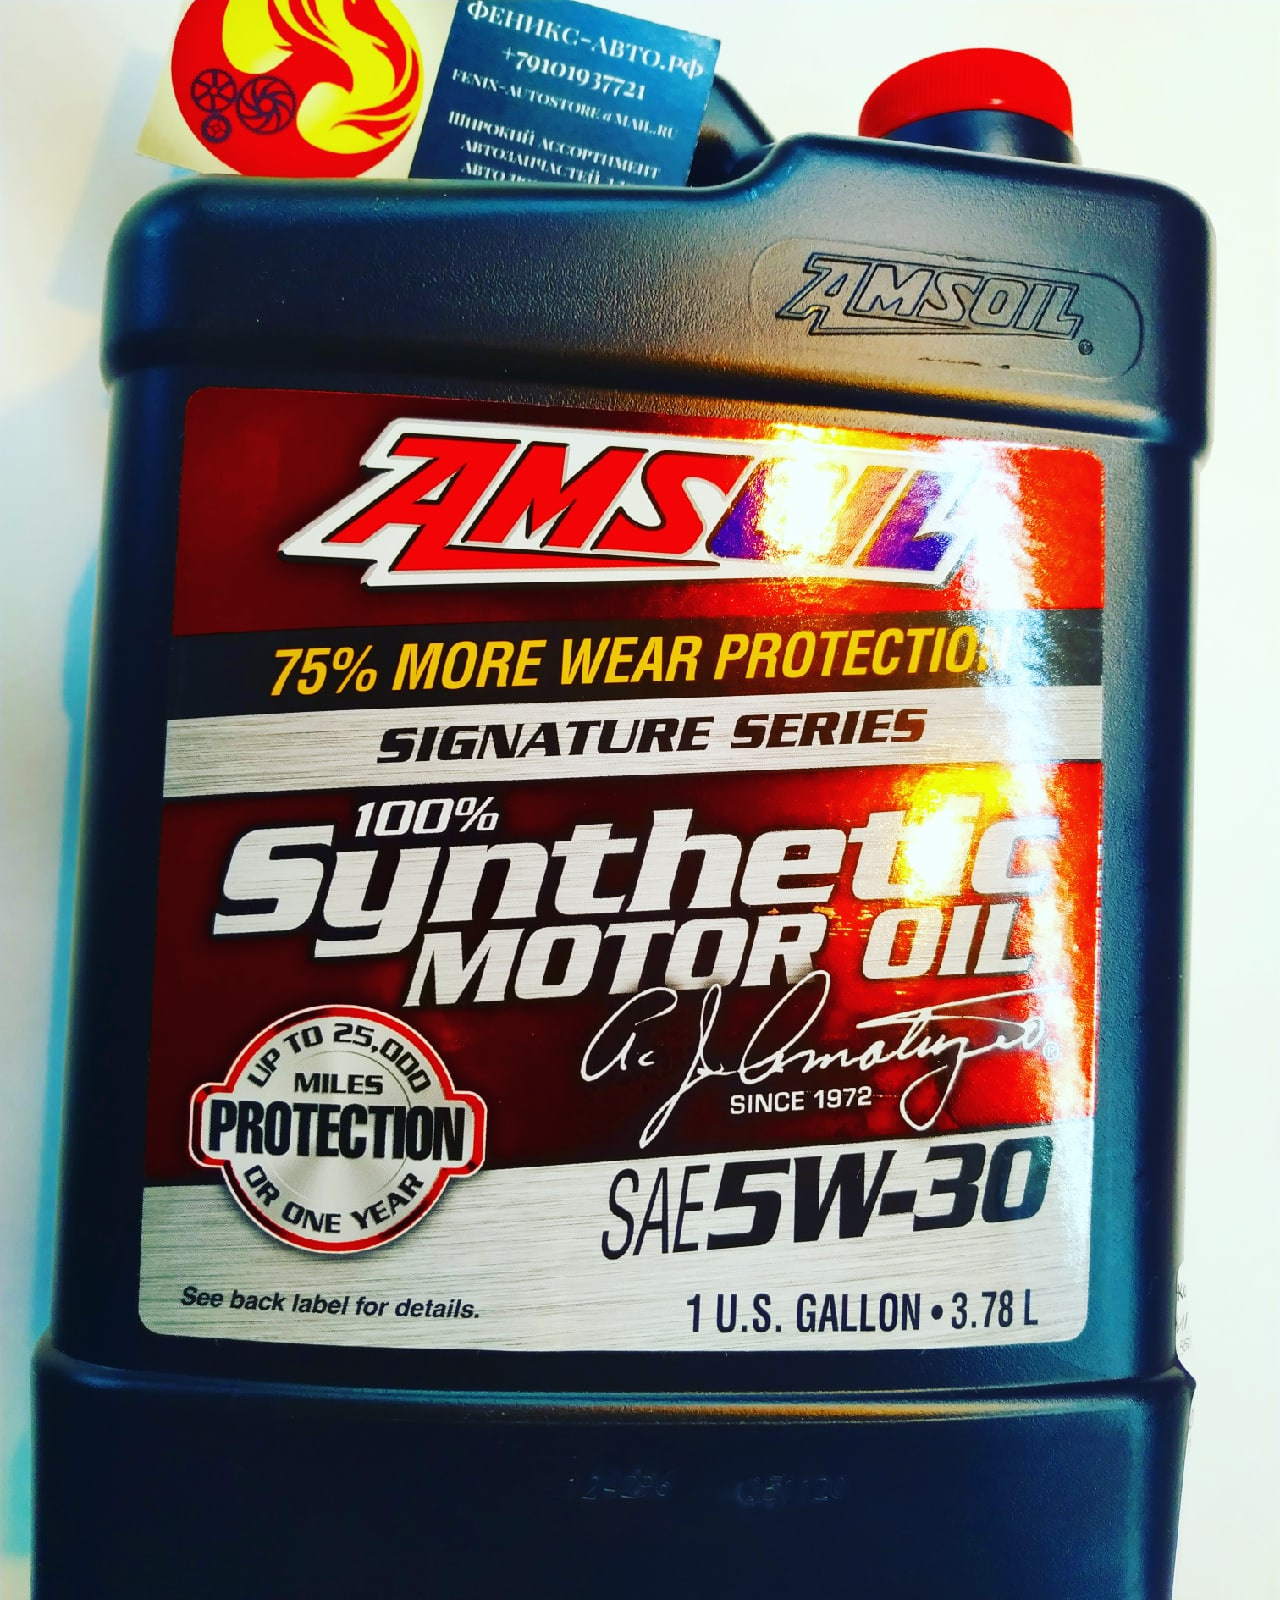 Amsoil signature series synthetic